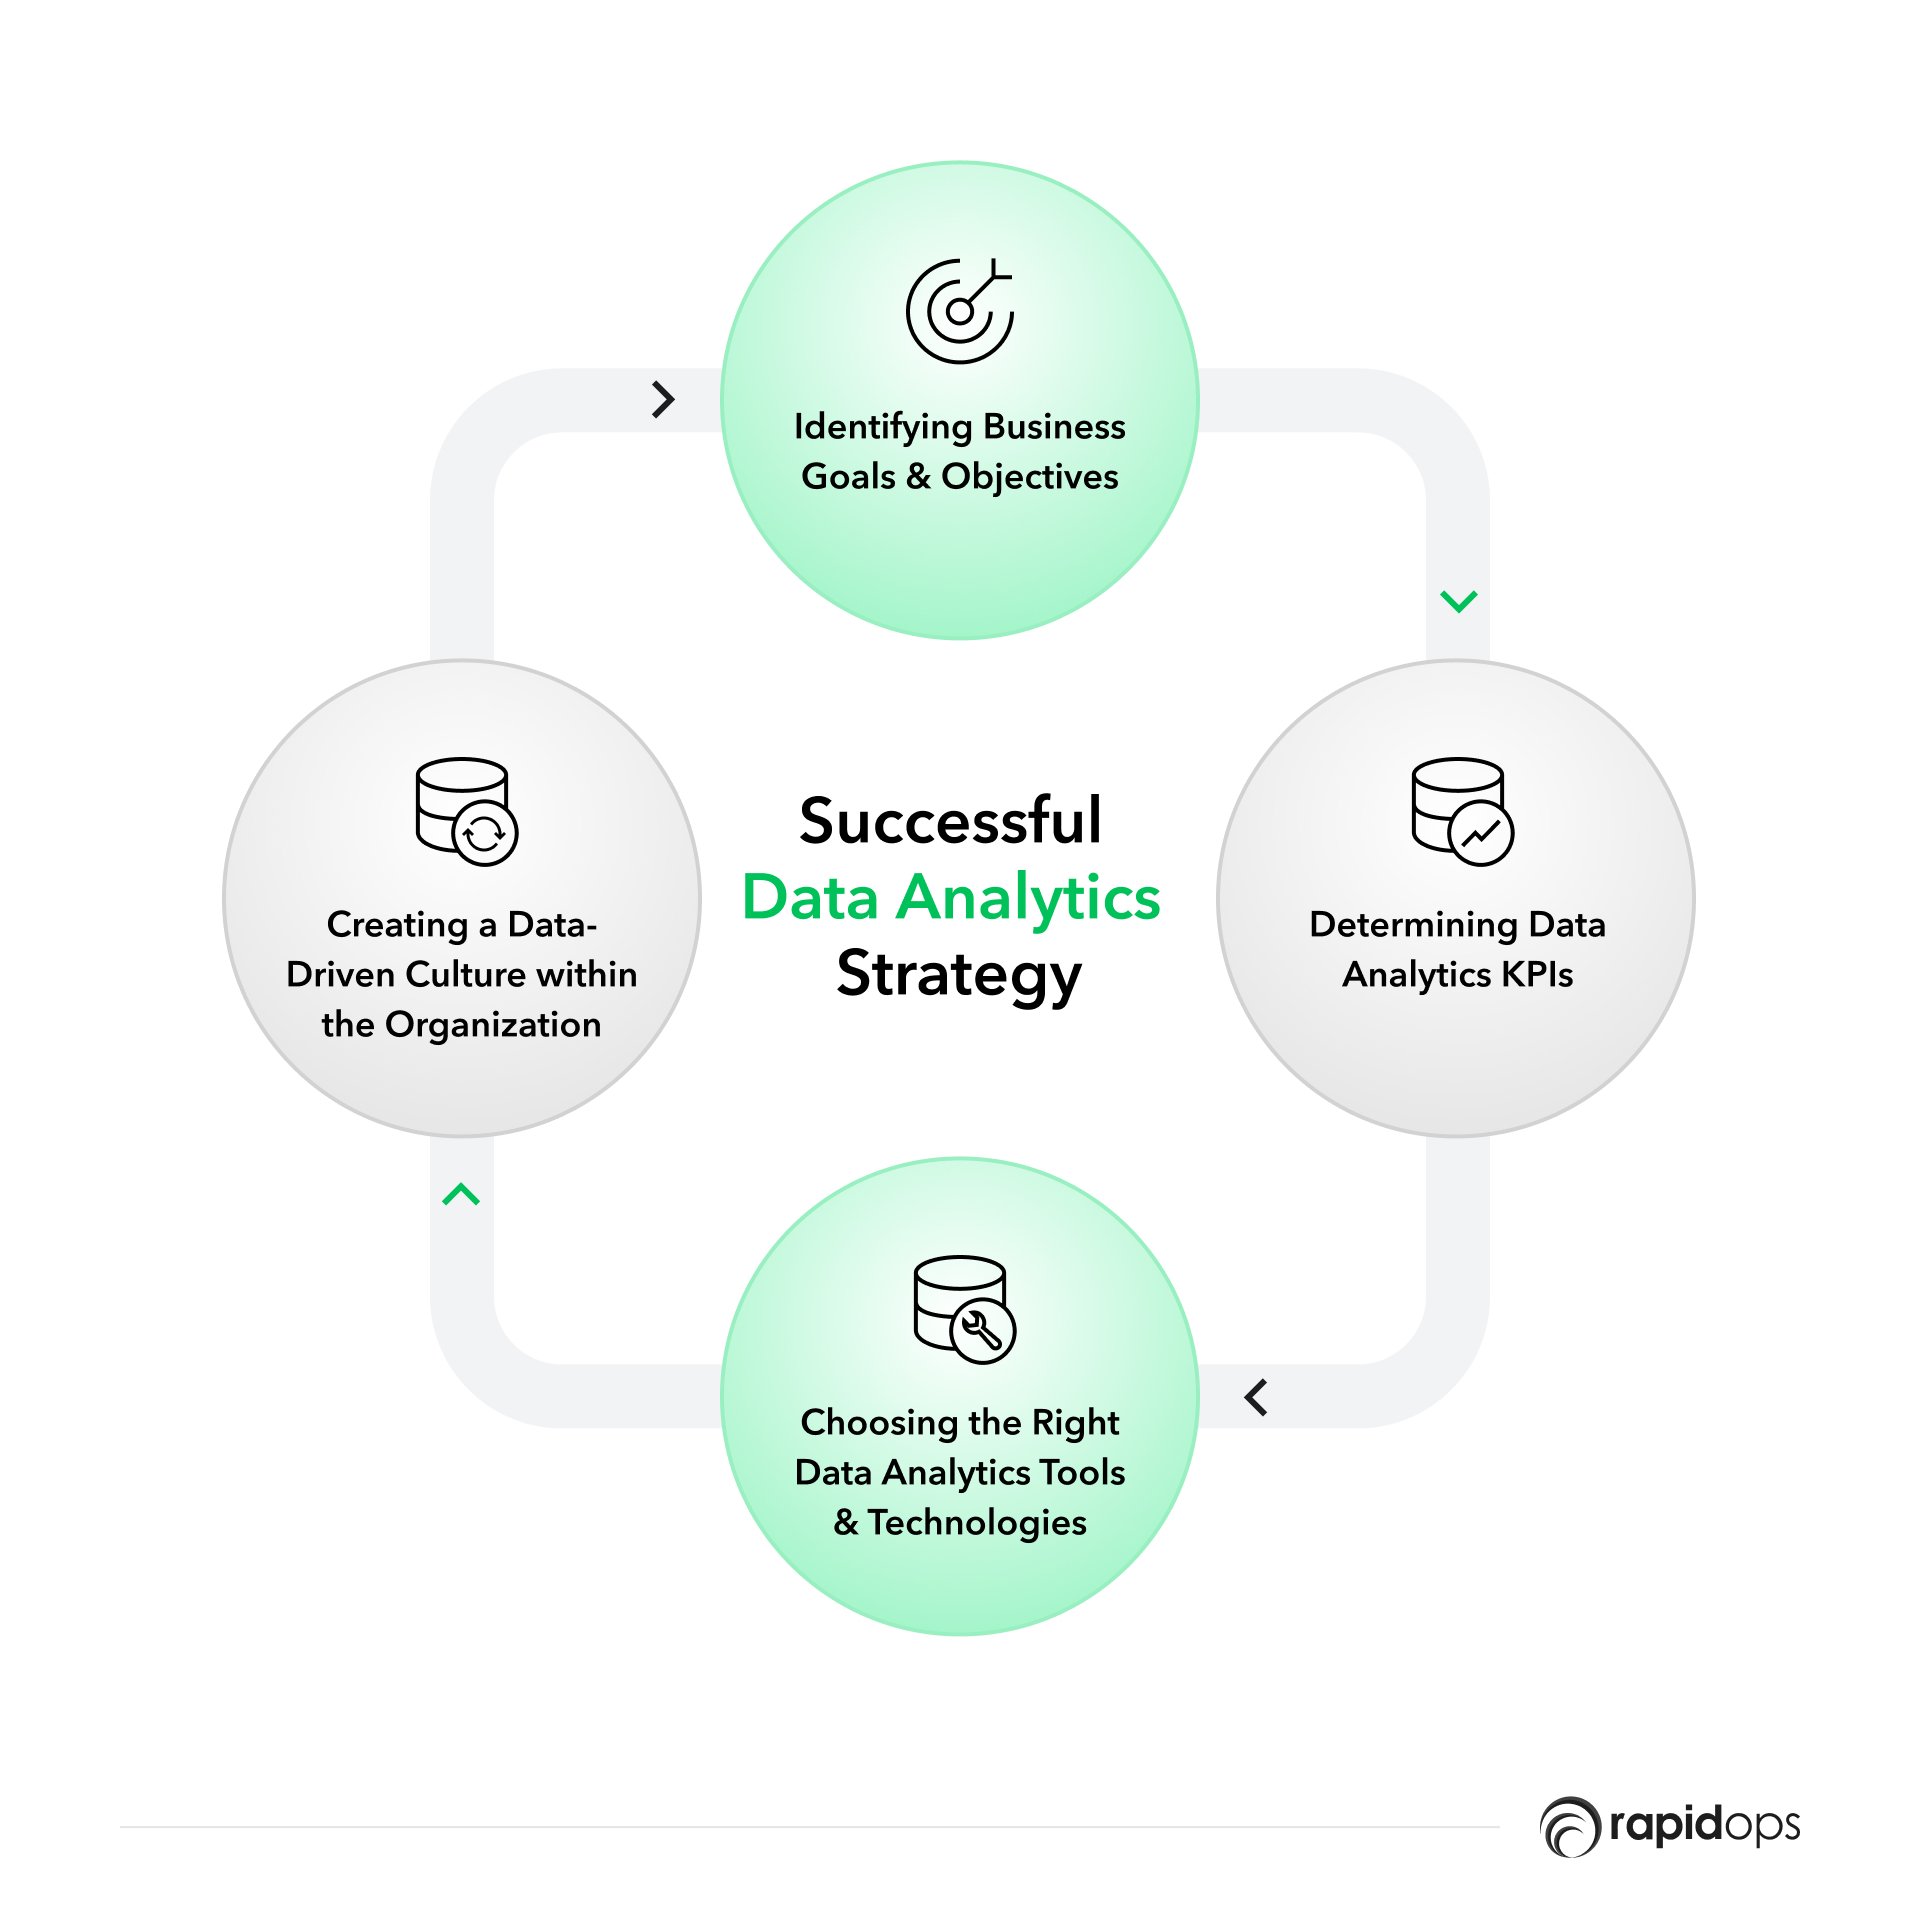 Key steps to building a successful data analytics strategy 4 points